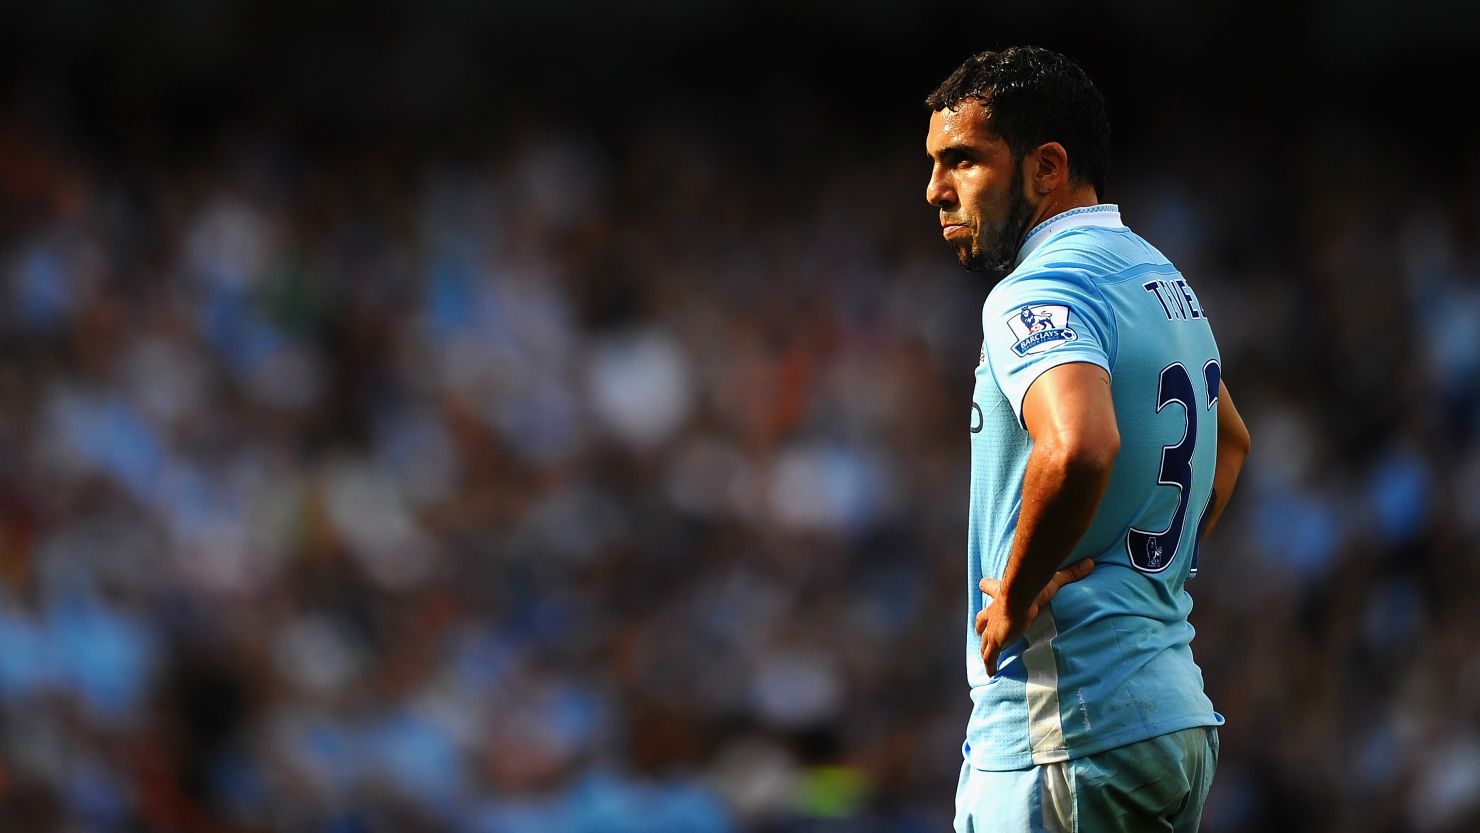 Plenty of players were on the move on a low-key transfer deadline day. But not Manchester City's Carlos Tevez.